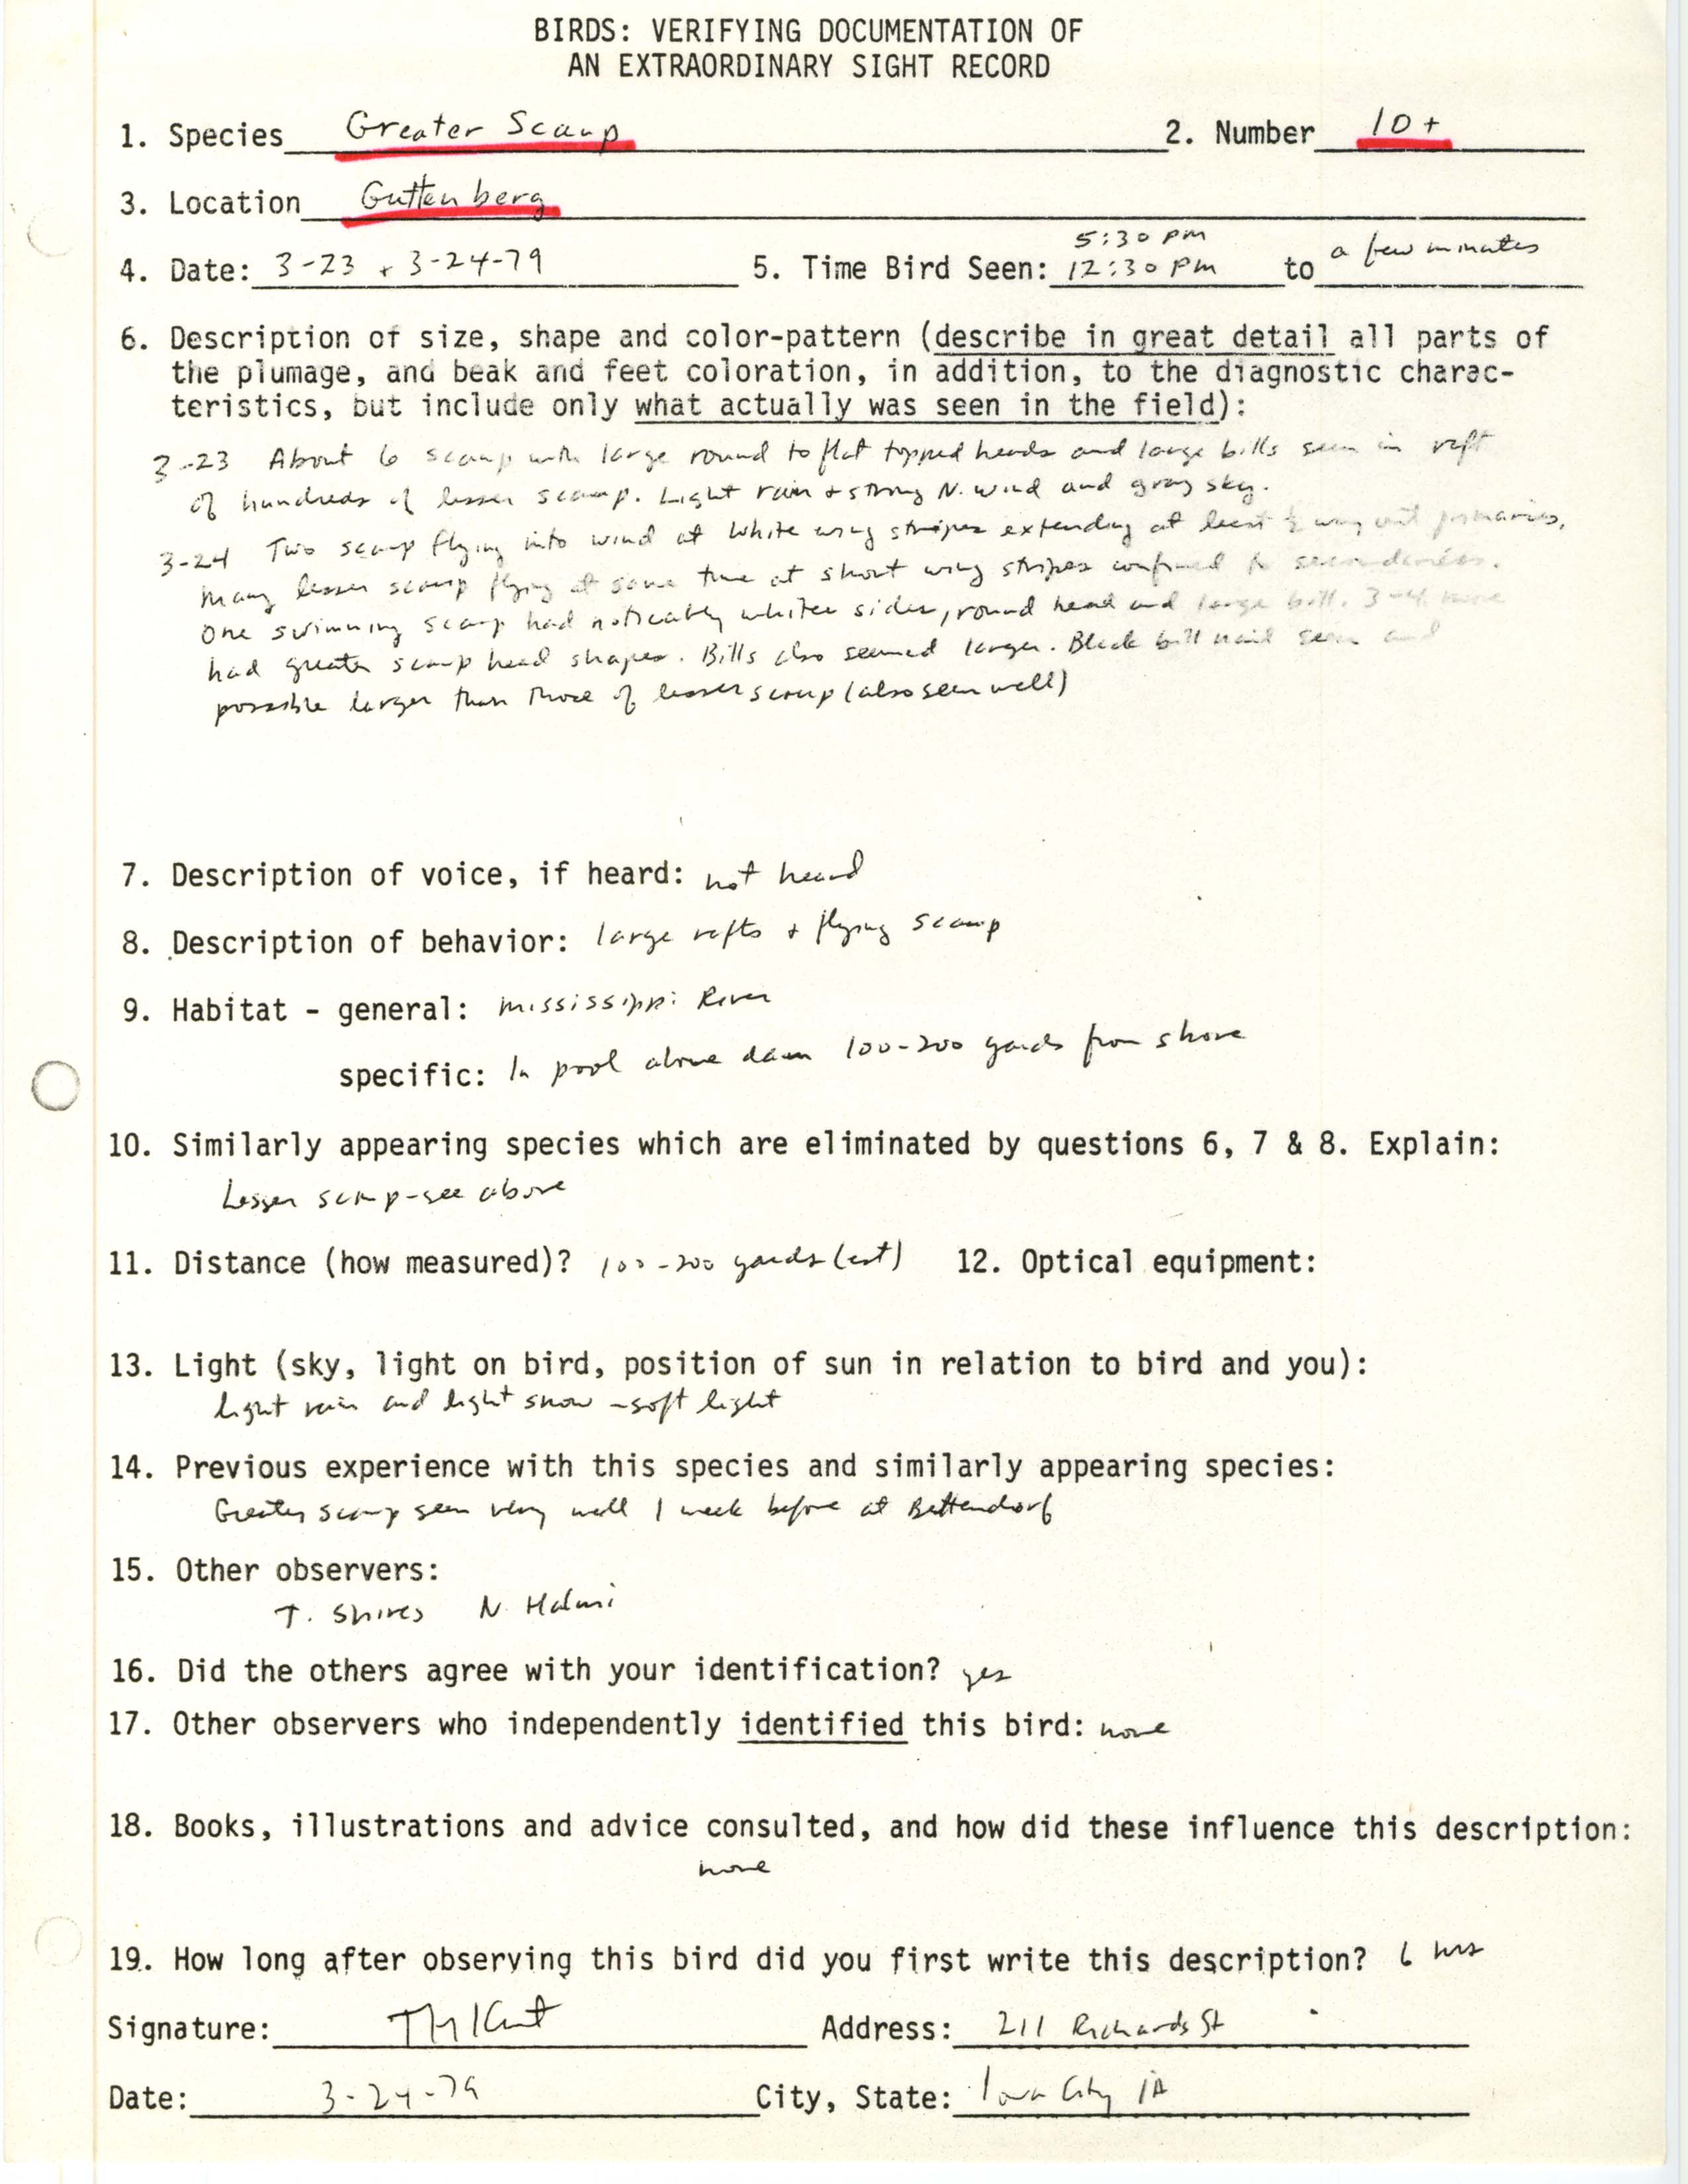 Rare bird documentation form for Greater Scaup at Guttenberg in 1979